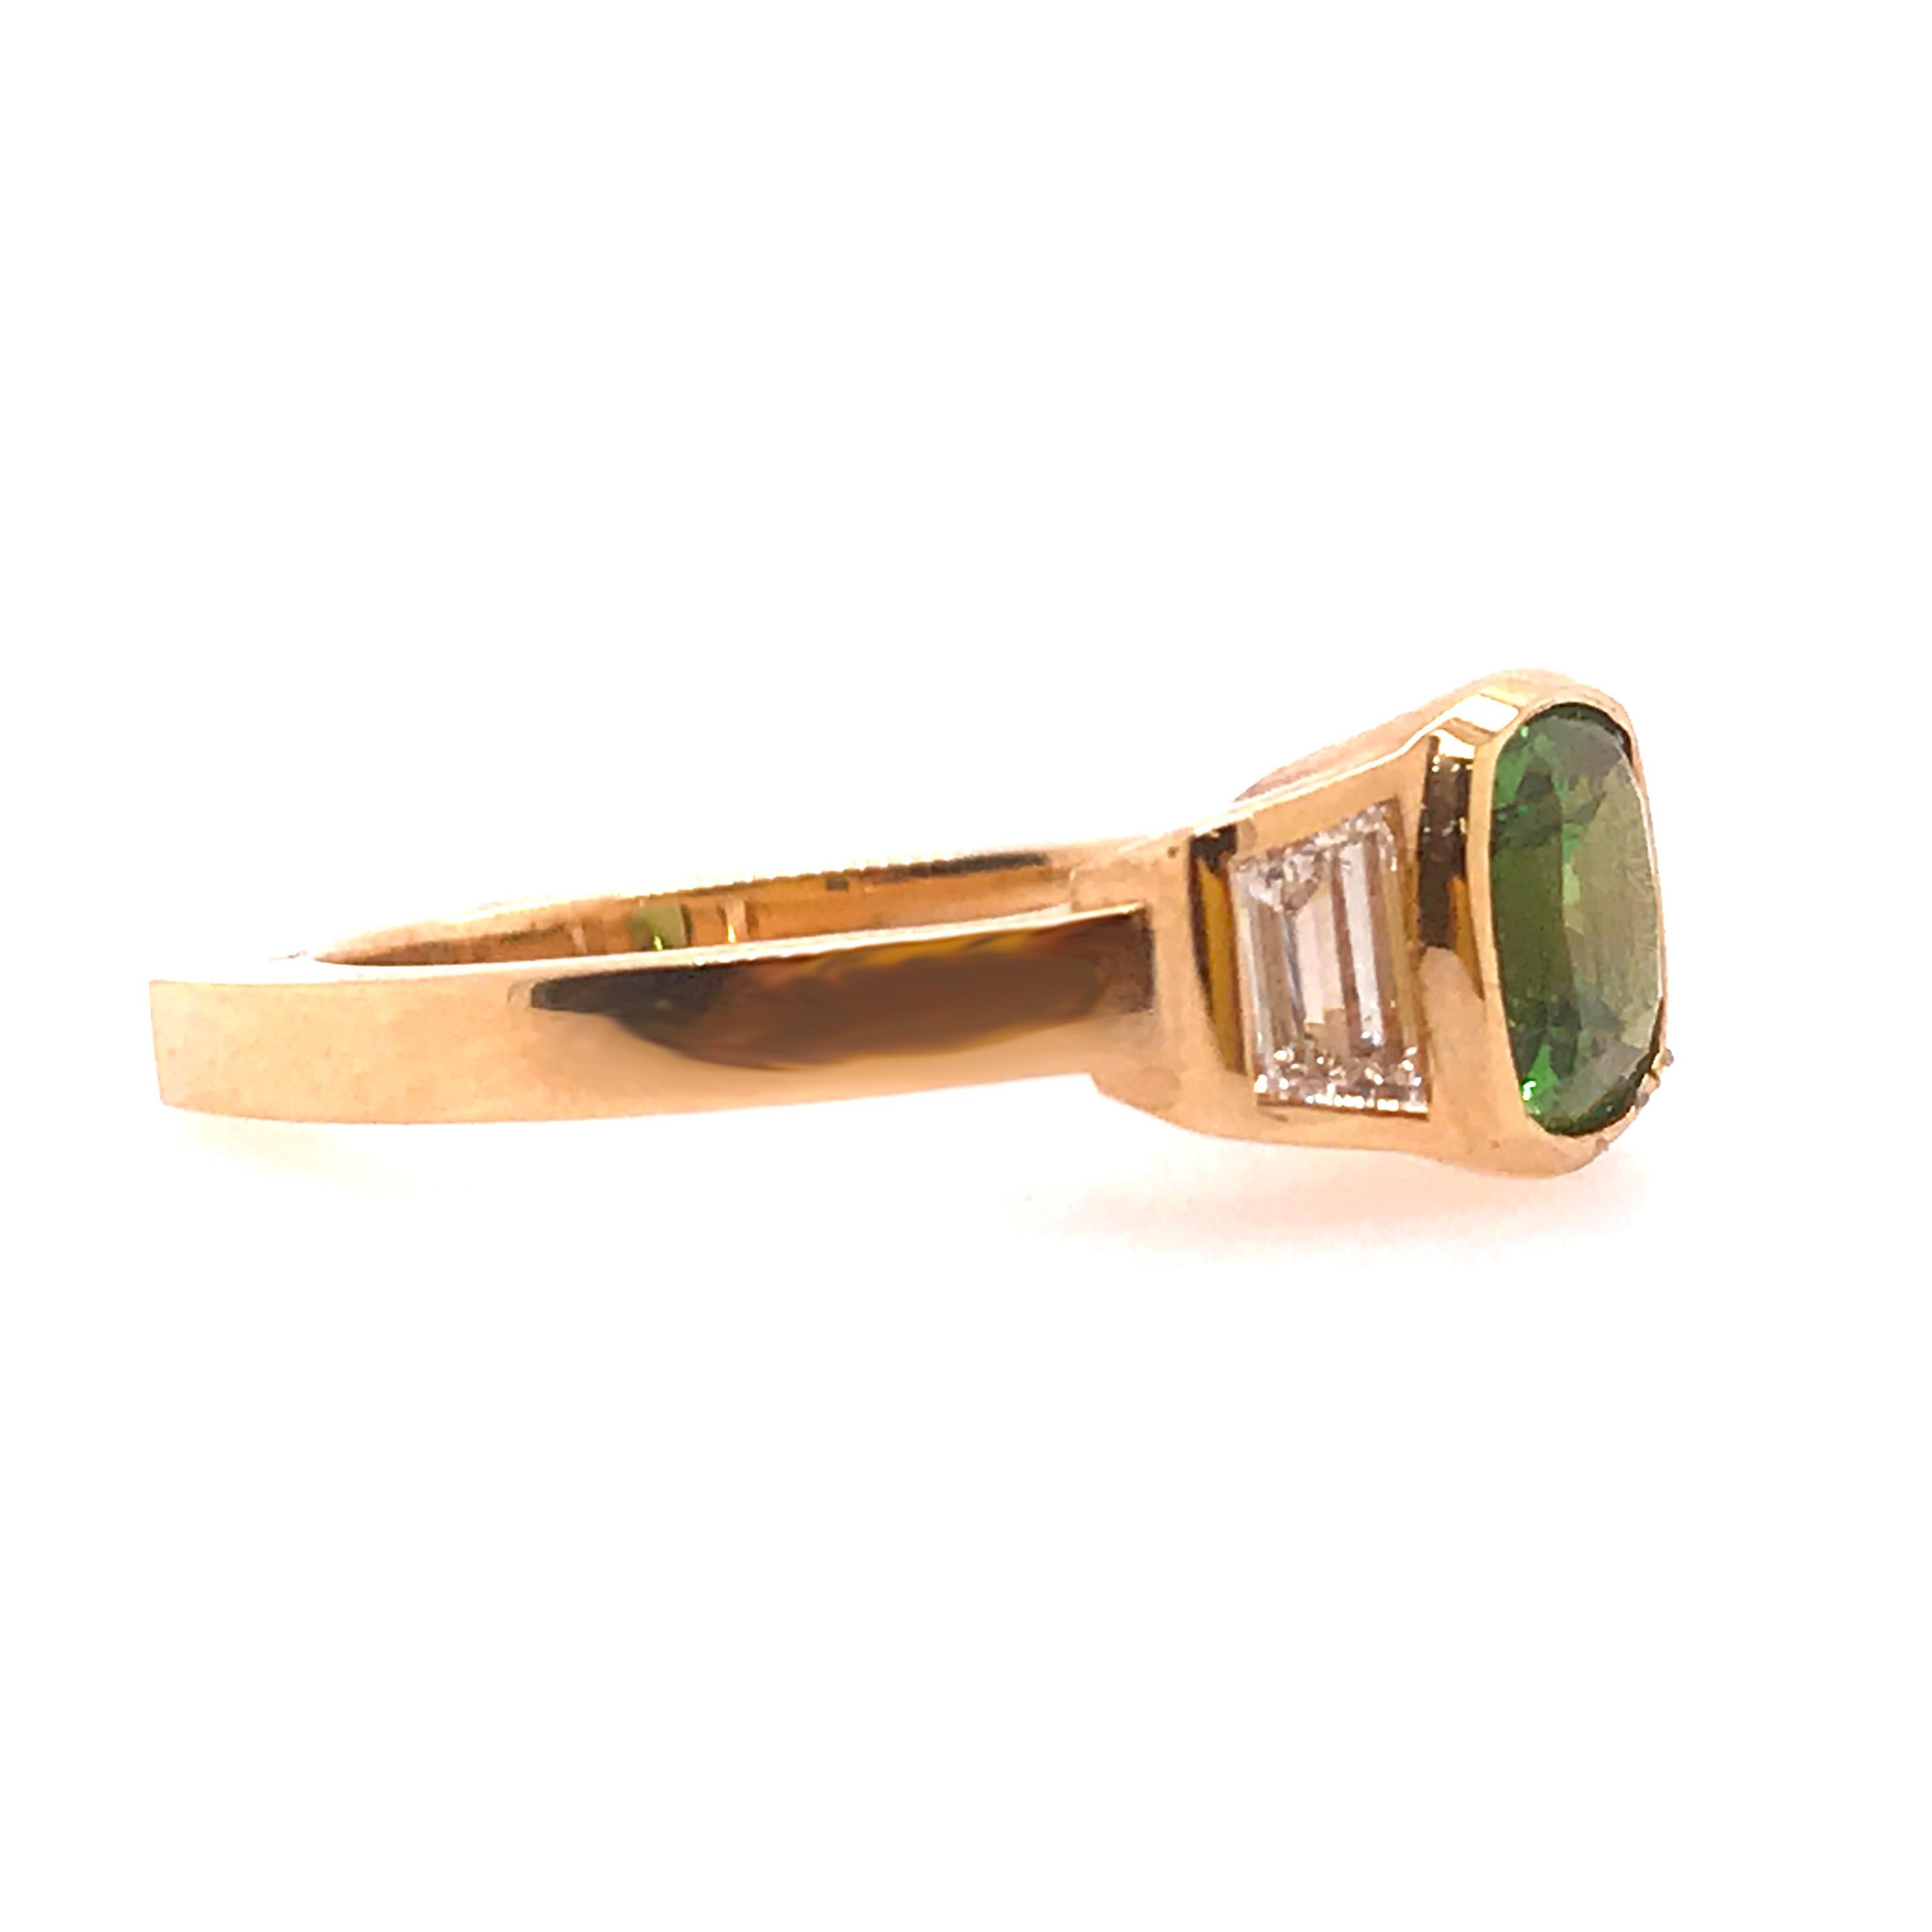 A custom one of a kind three stone ring with a cushion shape tsavorite garnet set in a modern yellow gold bezel. The center is flanked by two trapezoid shaped diamonds. The side diamonds are set in yellow gold bezels. The design is very clean and